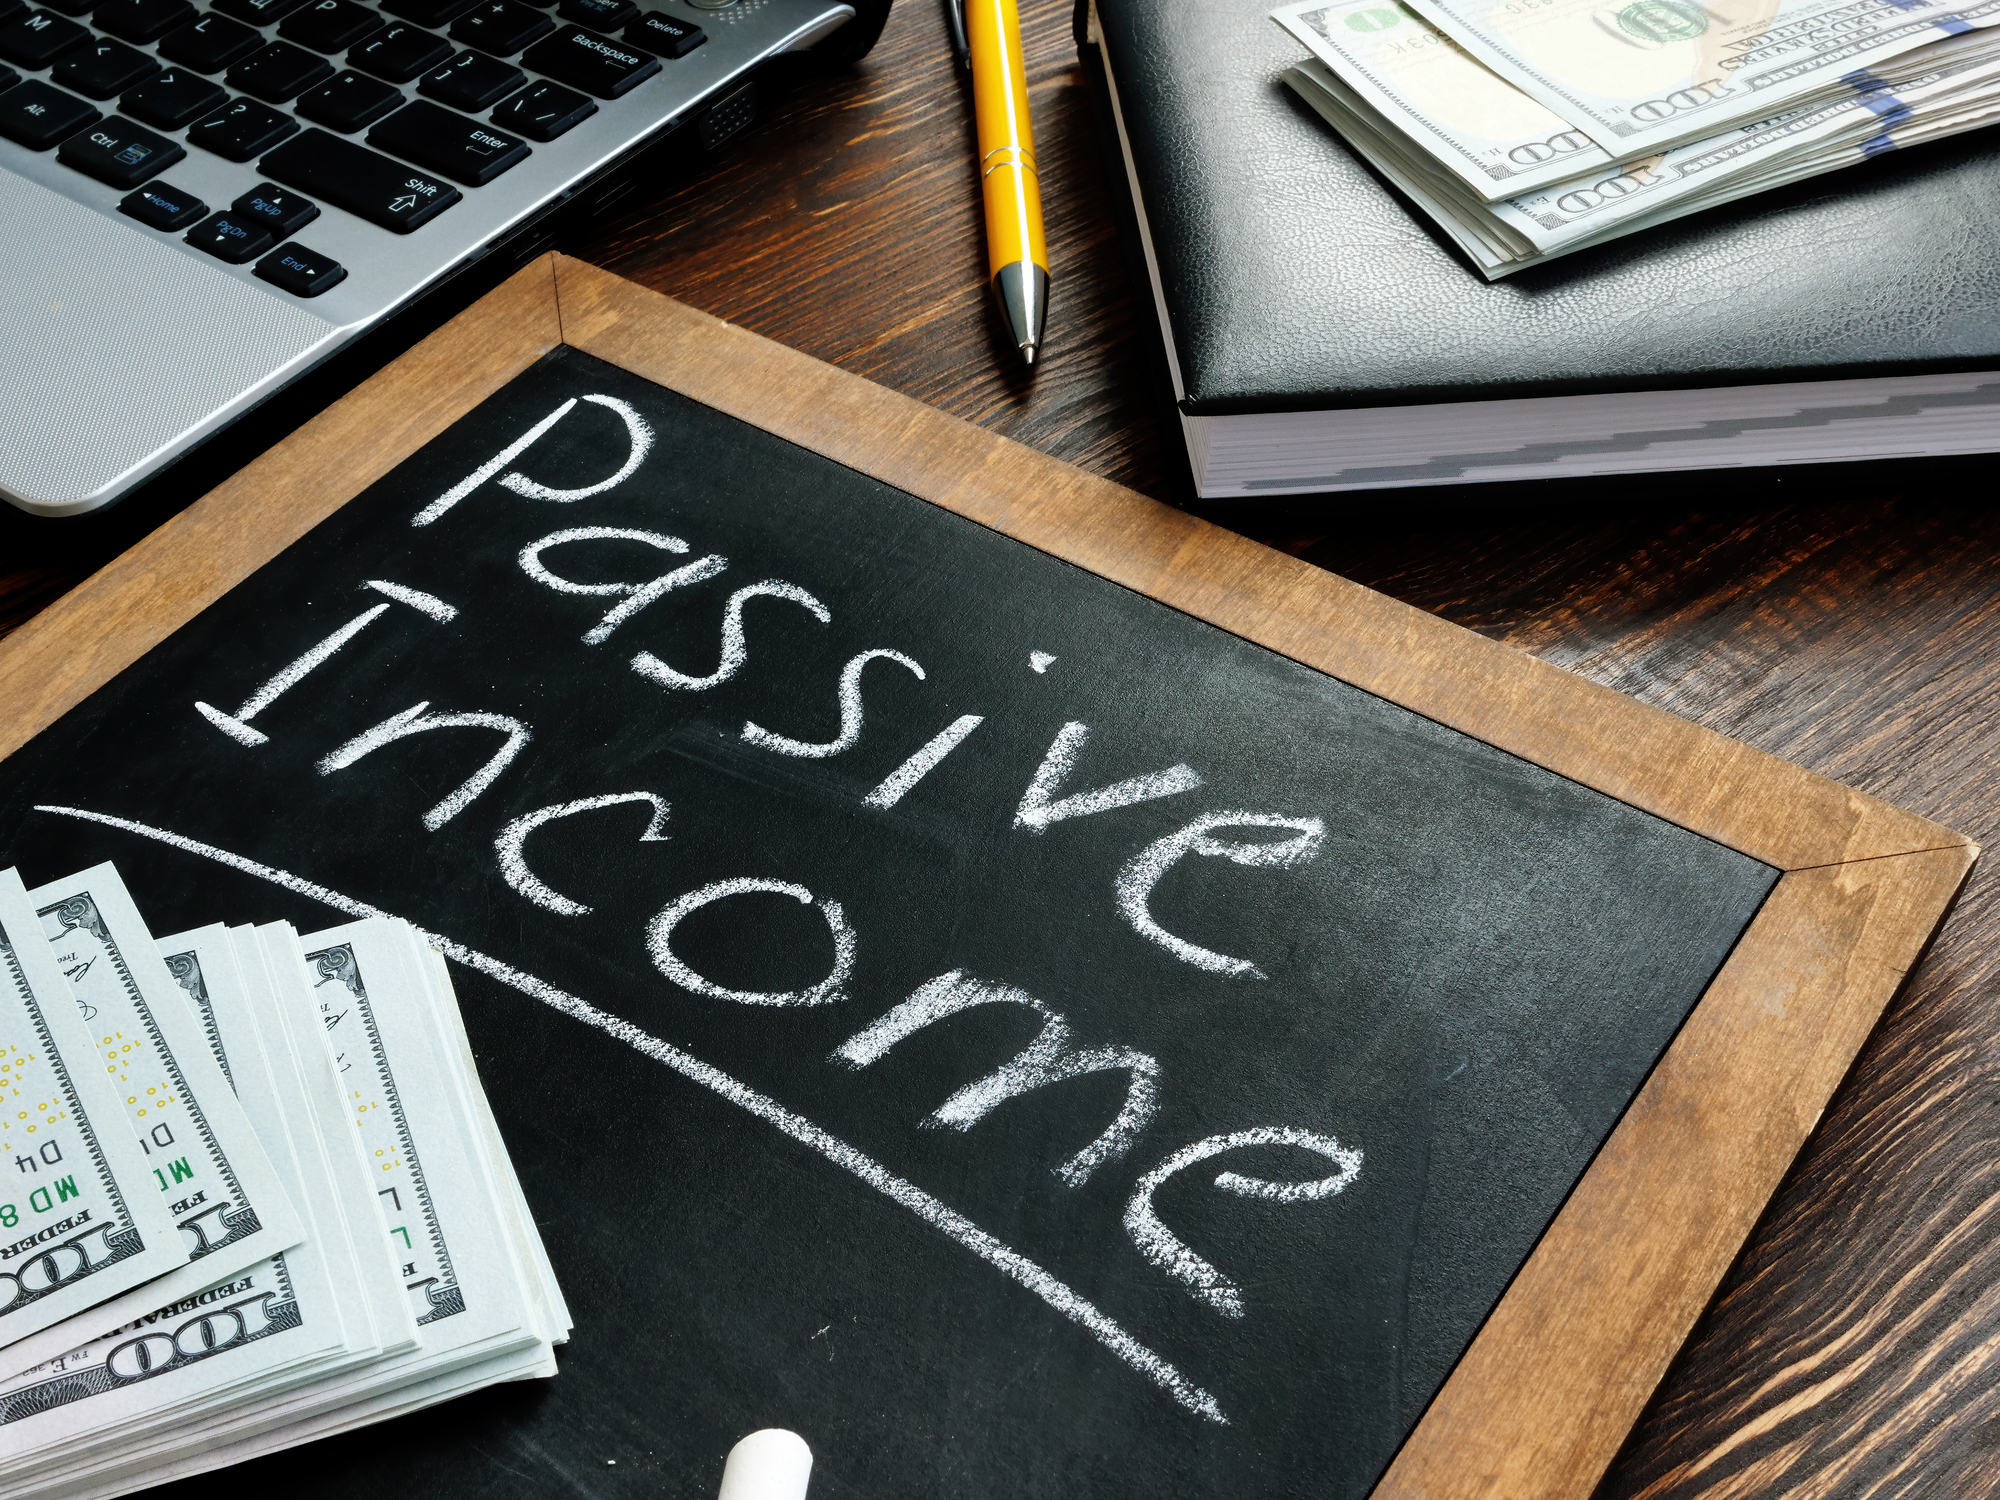 How To Make $50,000 in a Month: Passive Income Ideas with